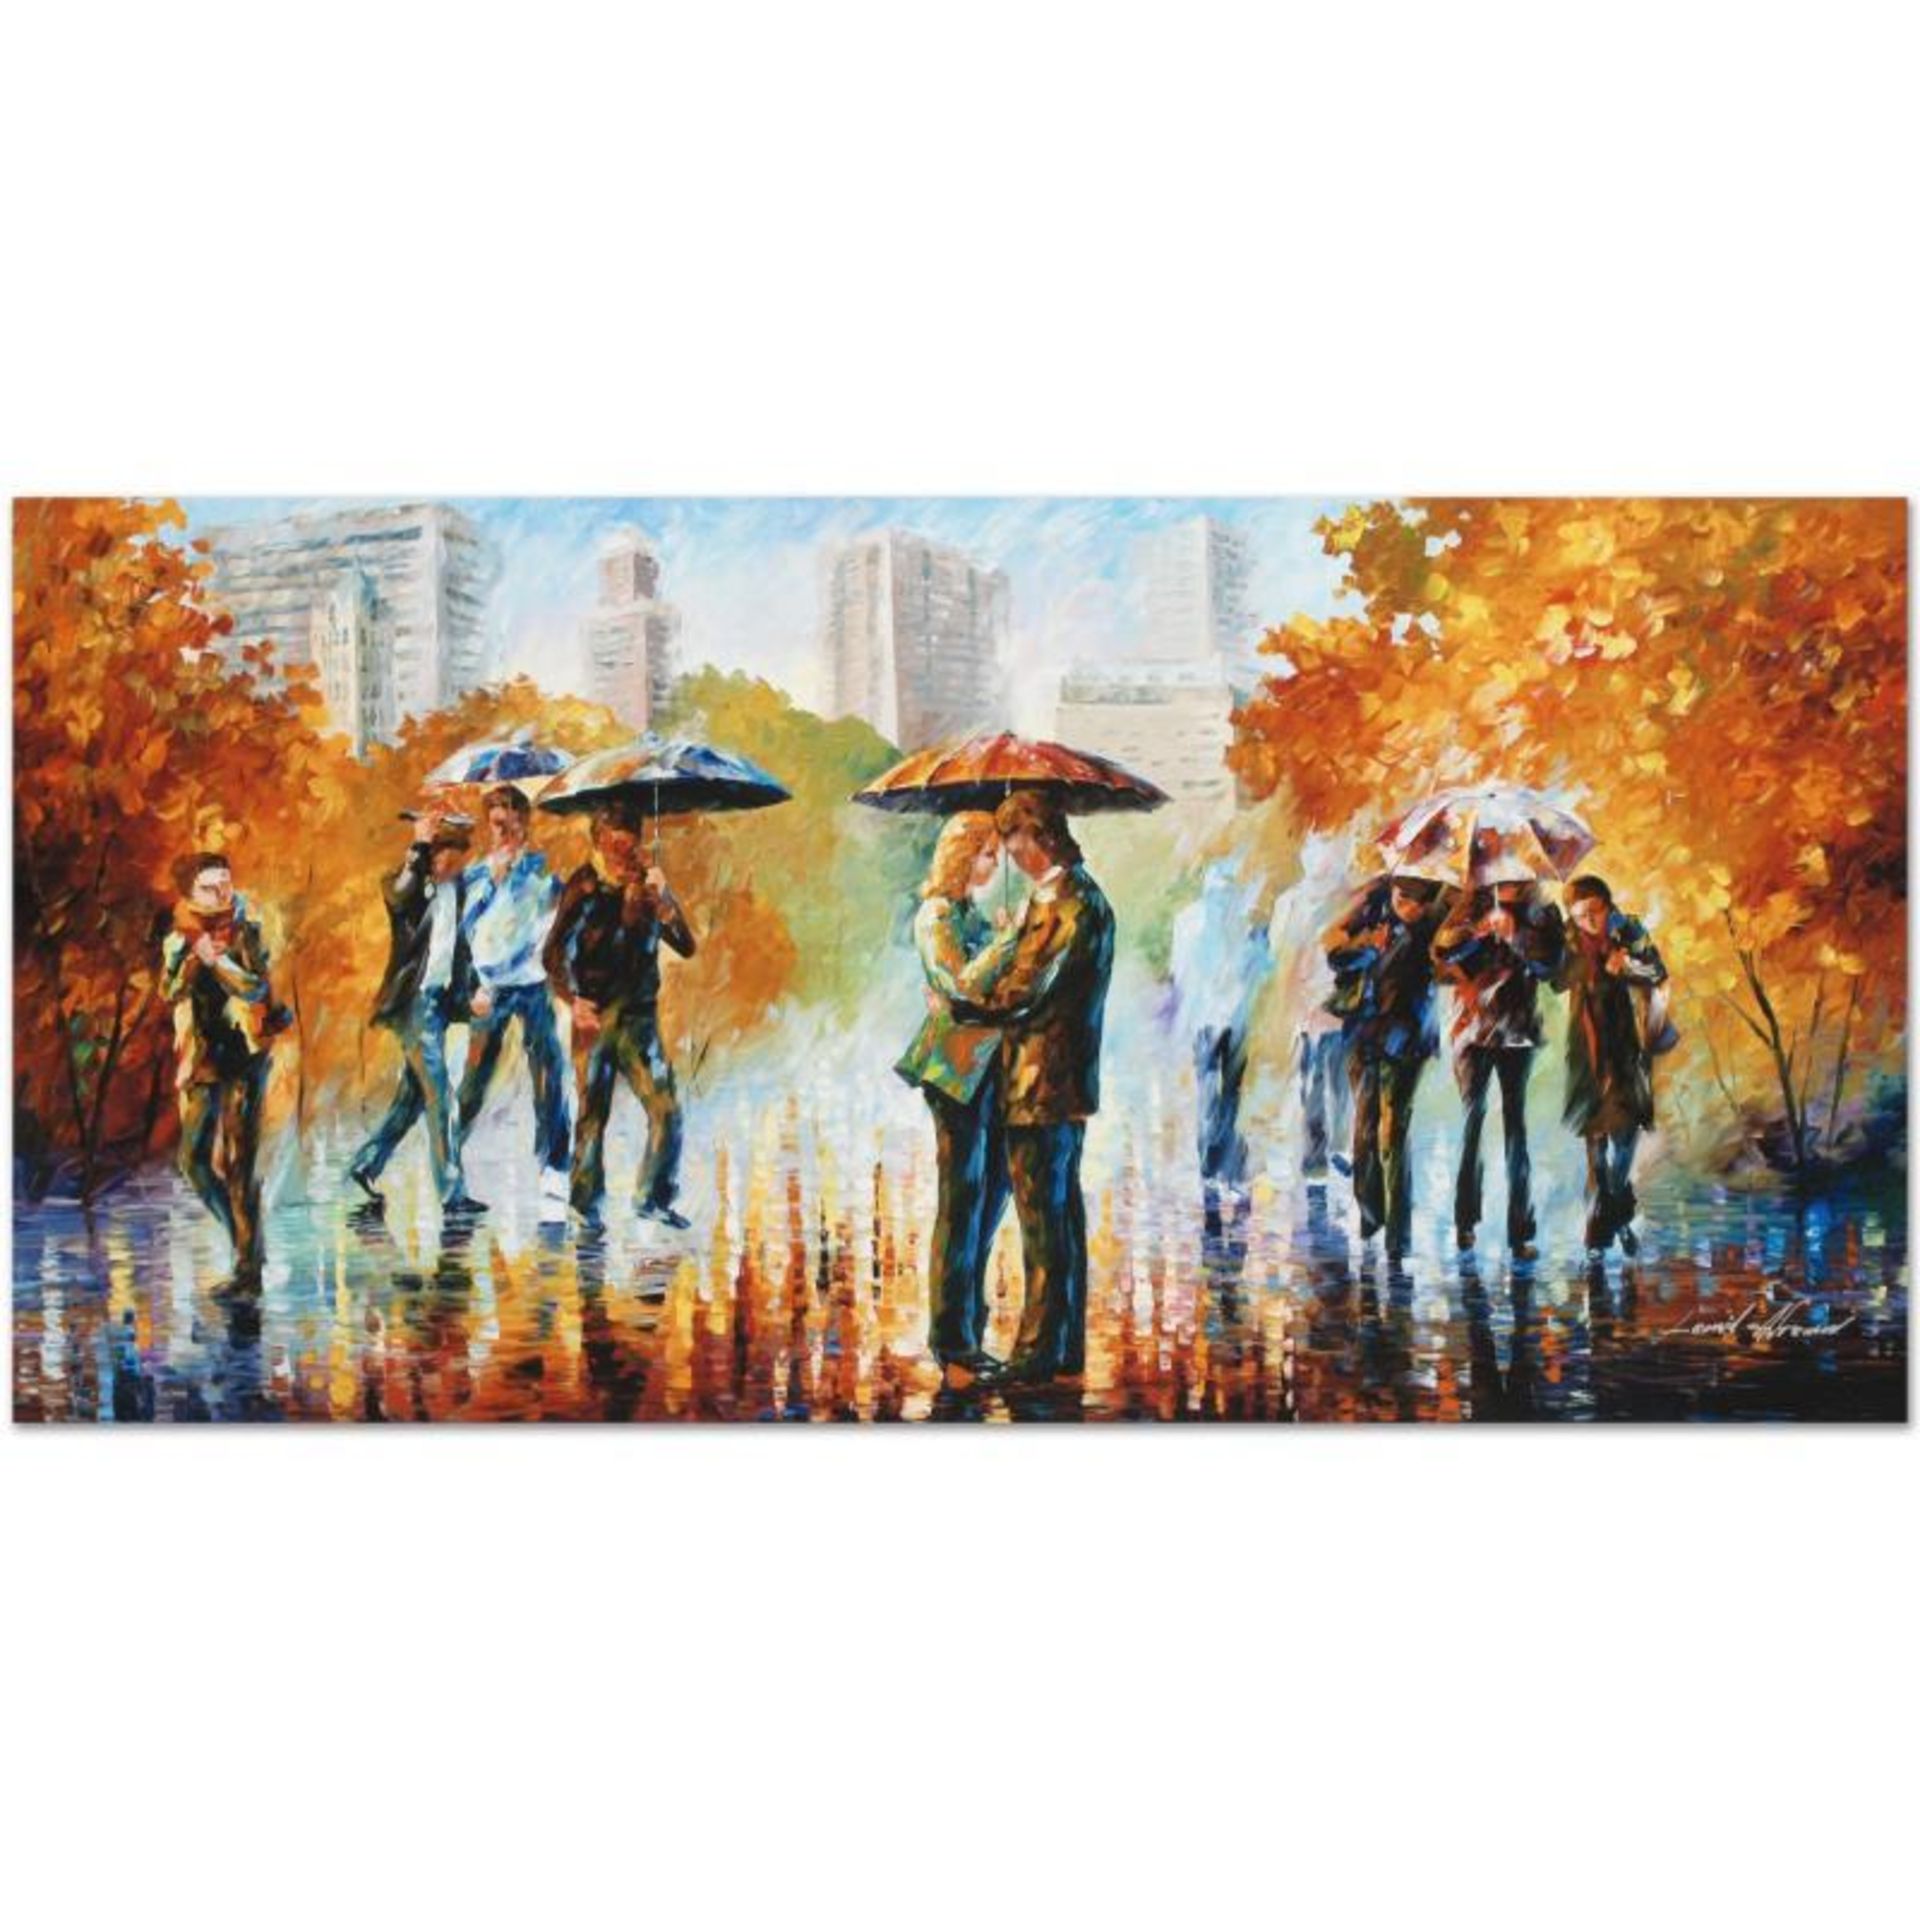 Simple Times by Afremov (1955-2019)